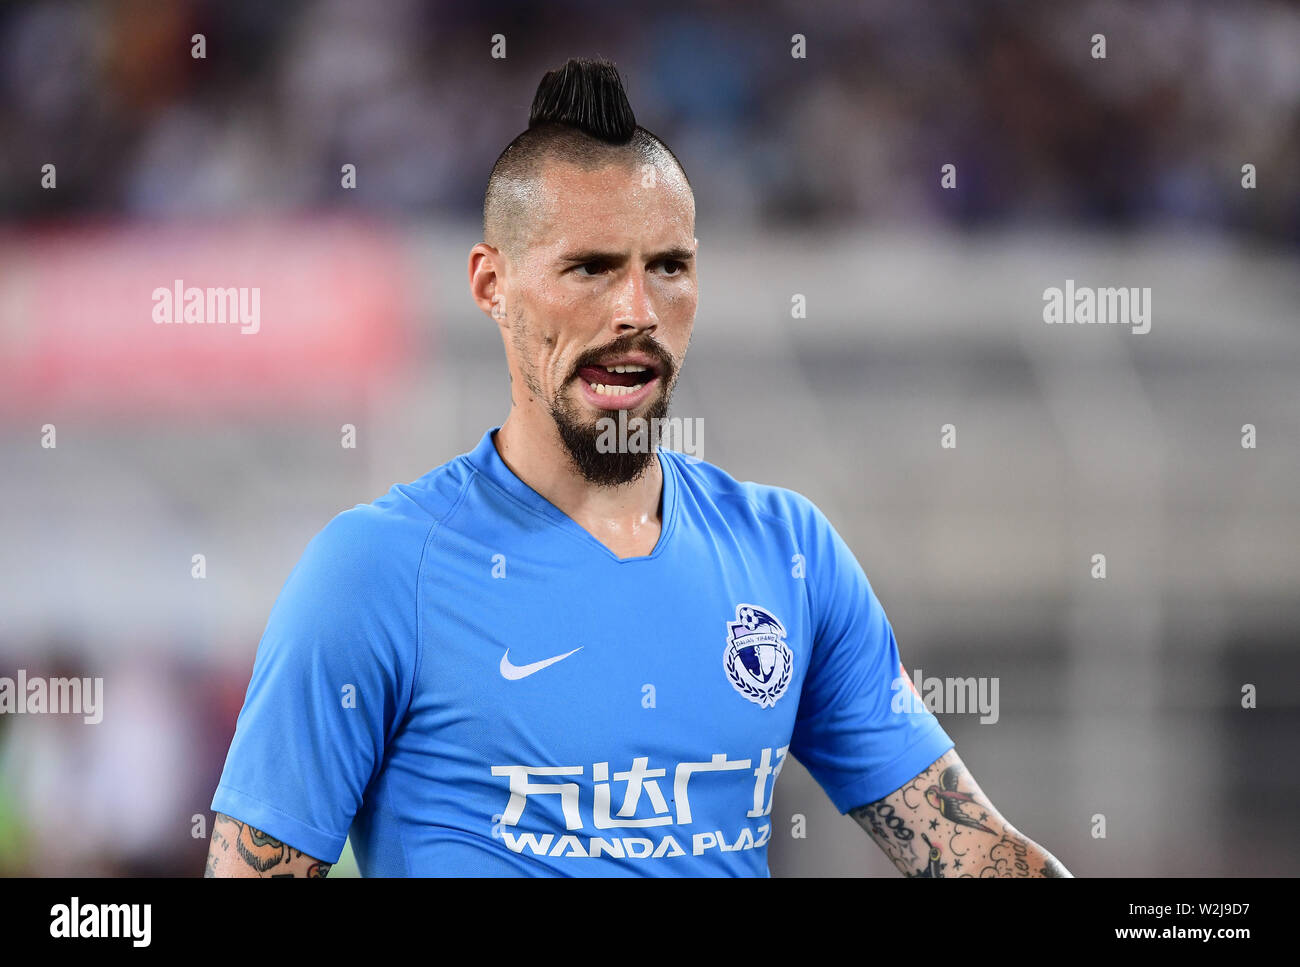 Slovak football player Marek Hamsik of Dalian Yifang reacts as he competes  against Henan Jianye in their 16th round match during the 2019 Chinese  Football Association Super League (CSL) in Dalian city,